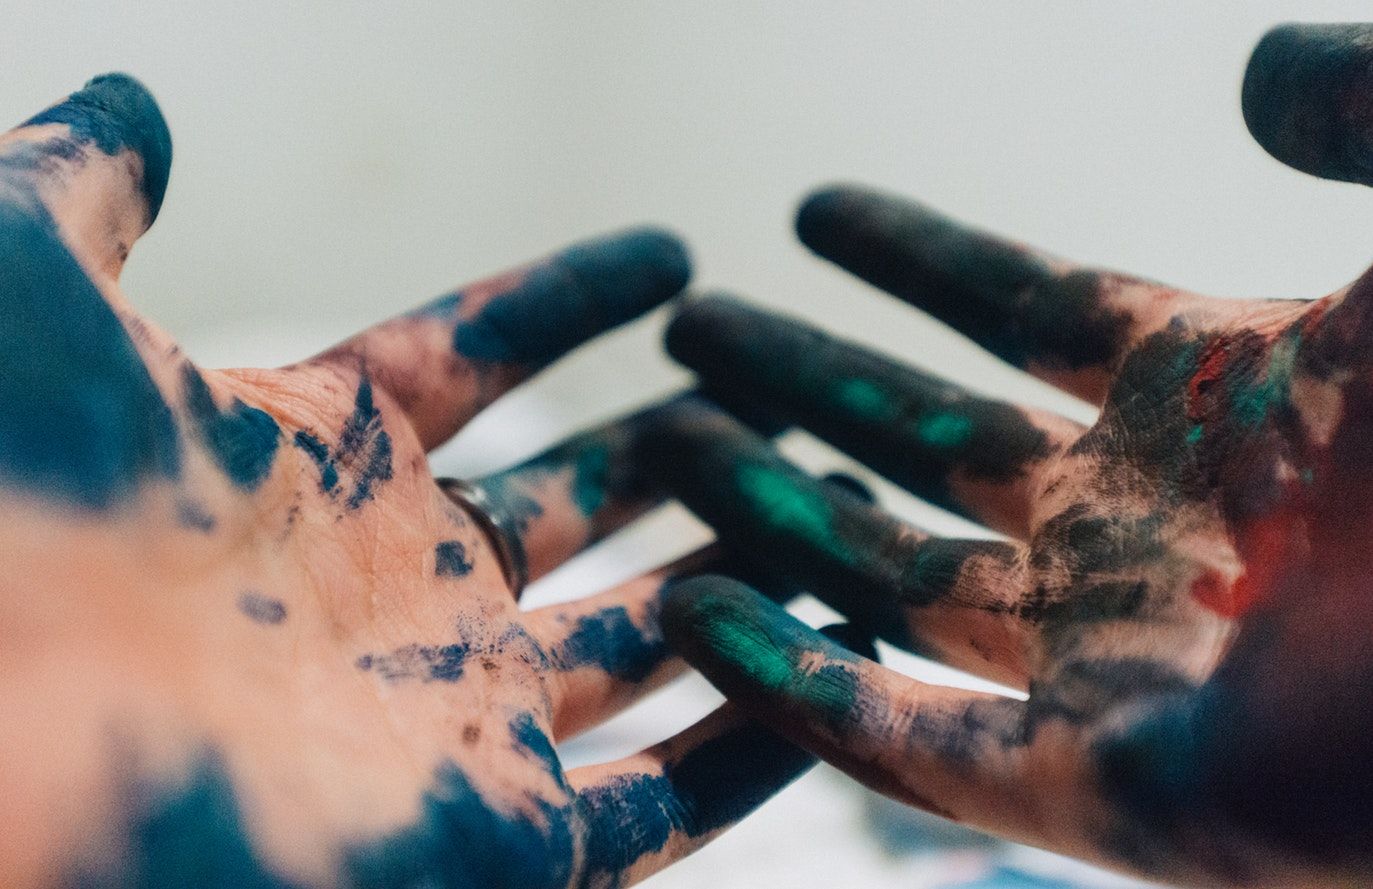 Hands with paint on them.